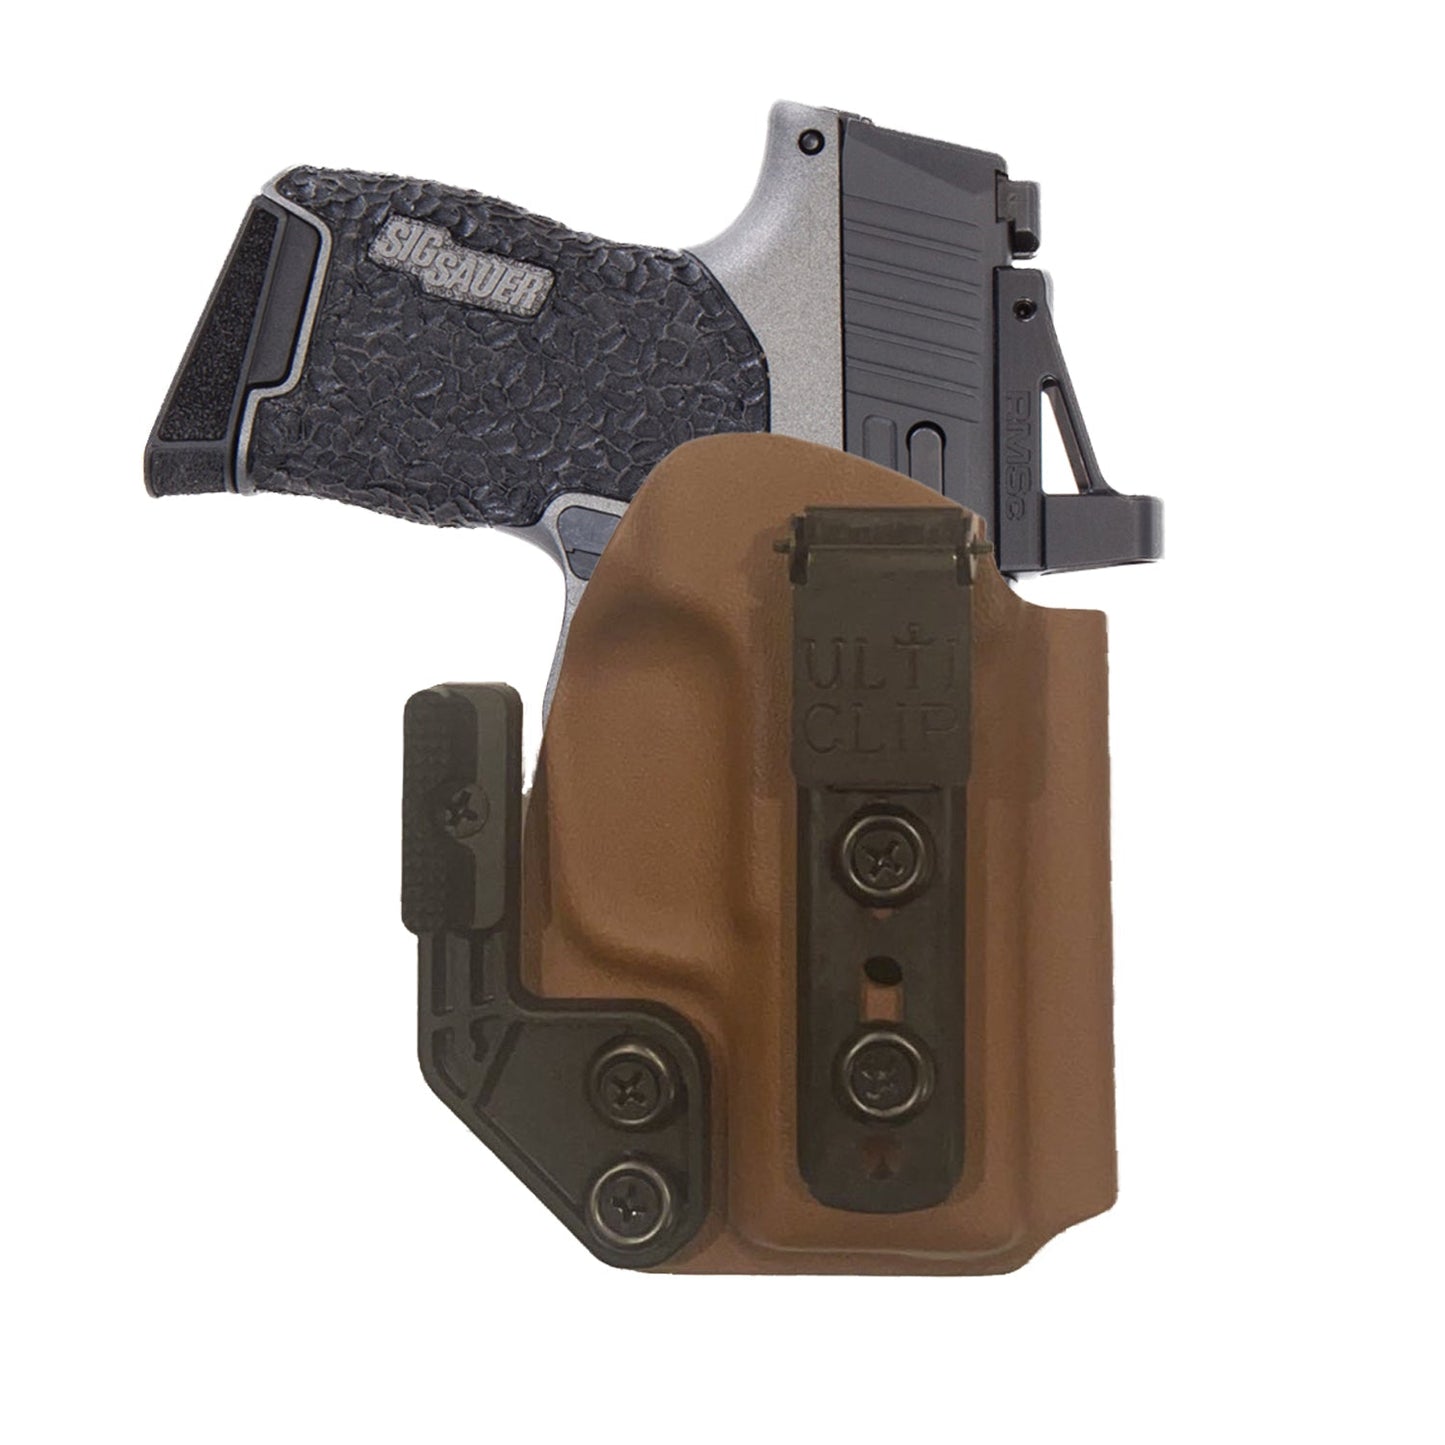 SIG P365XL WIth LIMA Light/ Laser (ULTI-CLIP 3) IWB (Inside The Waistband Holster)